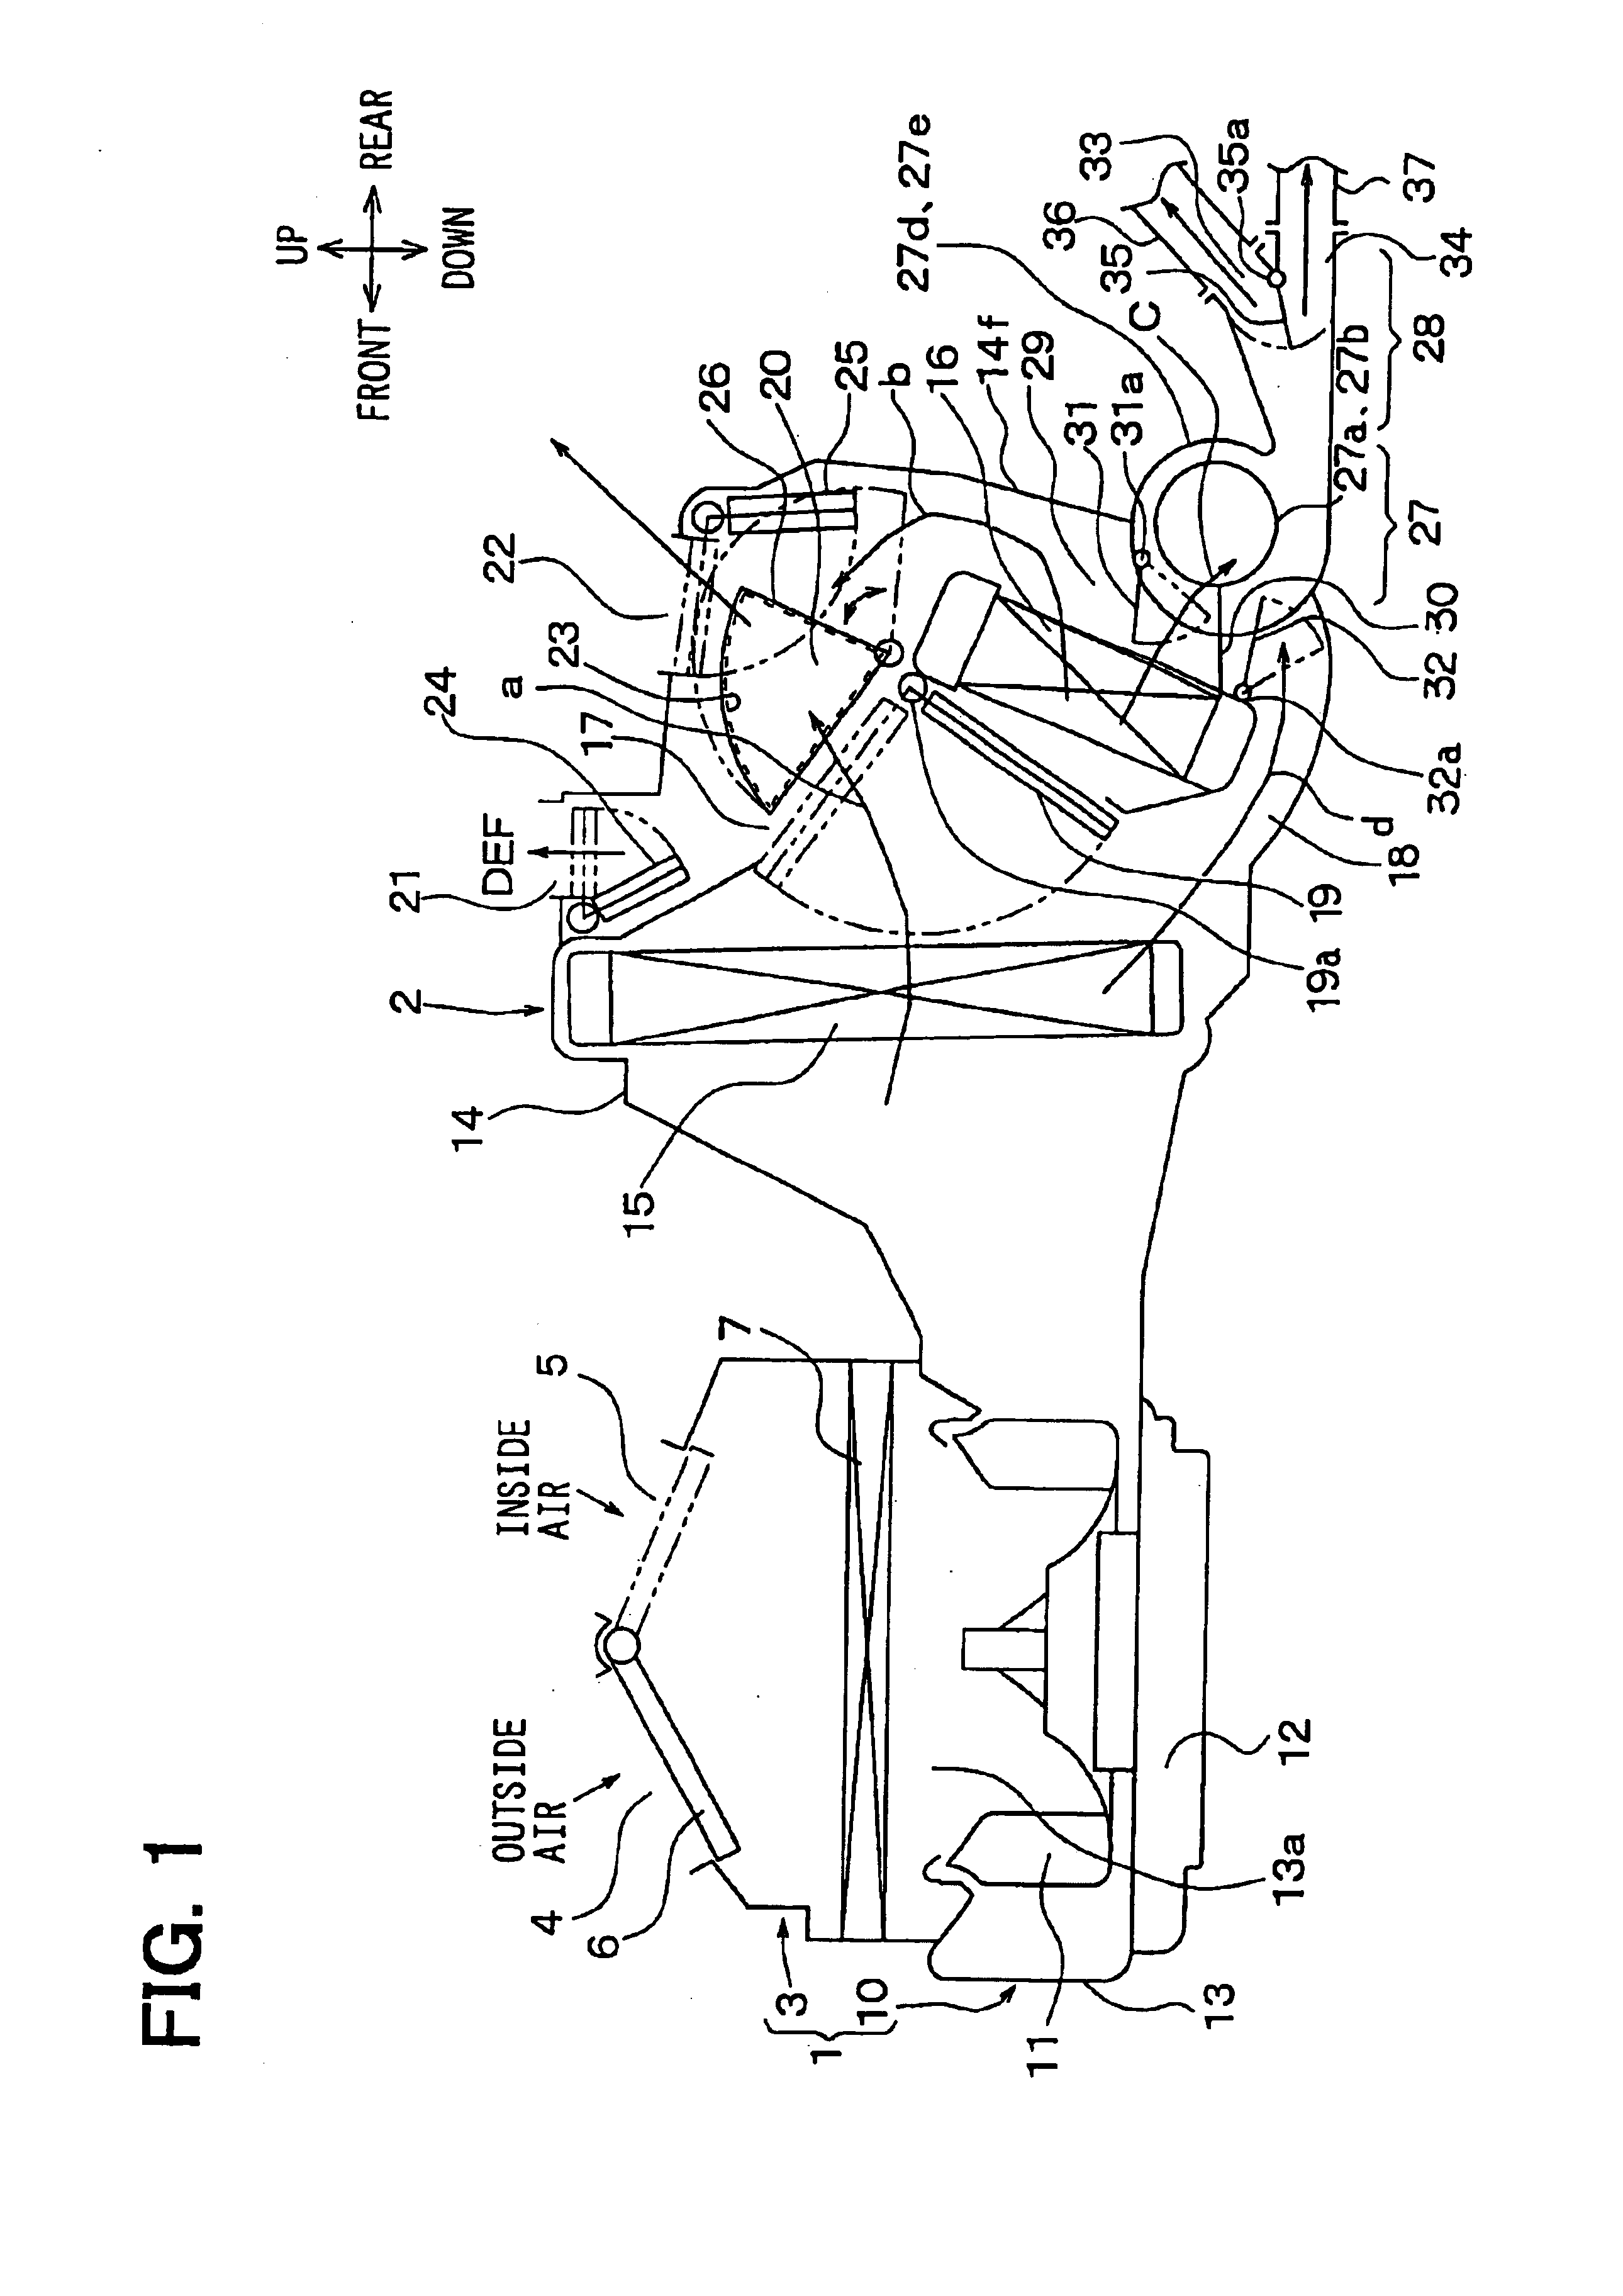 Vehicle air conditioner with automatic control of main blower and sub-blower